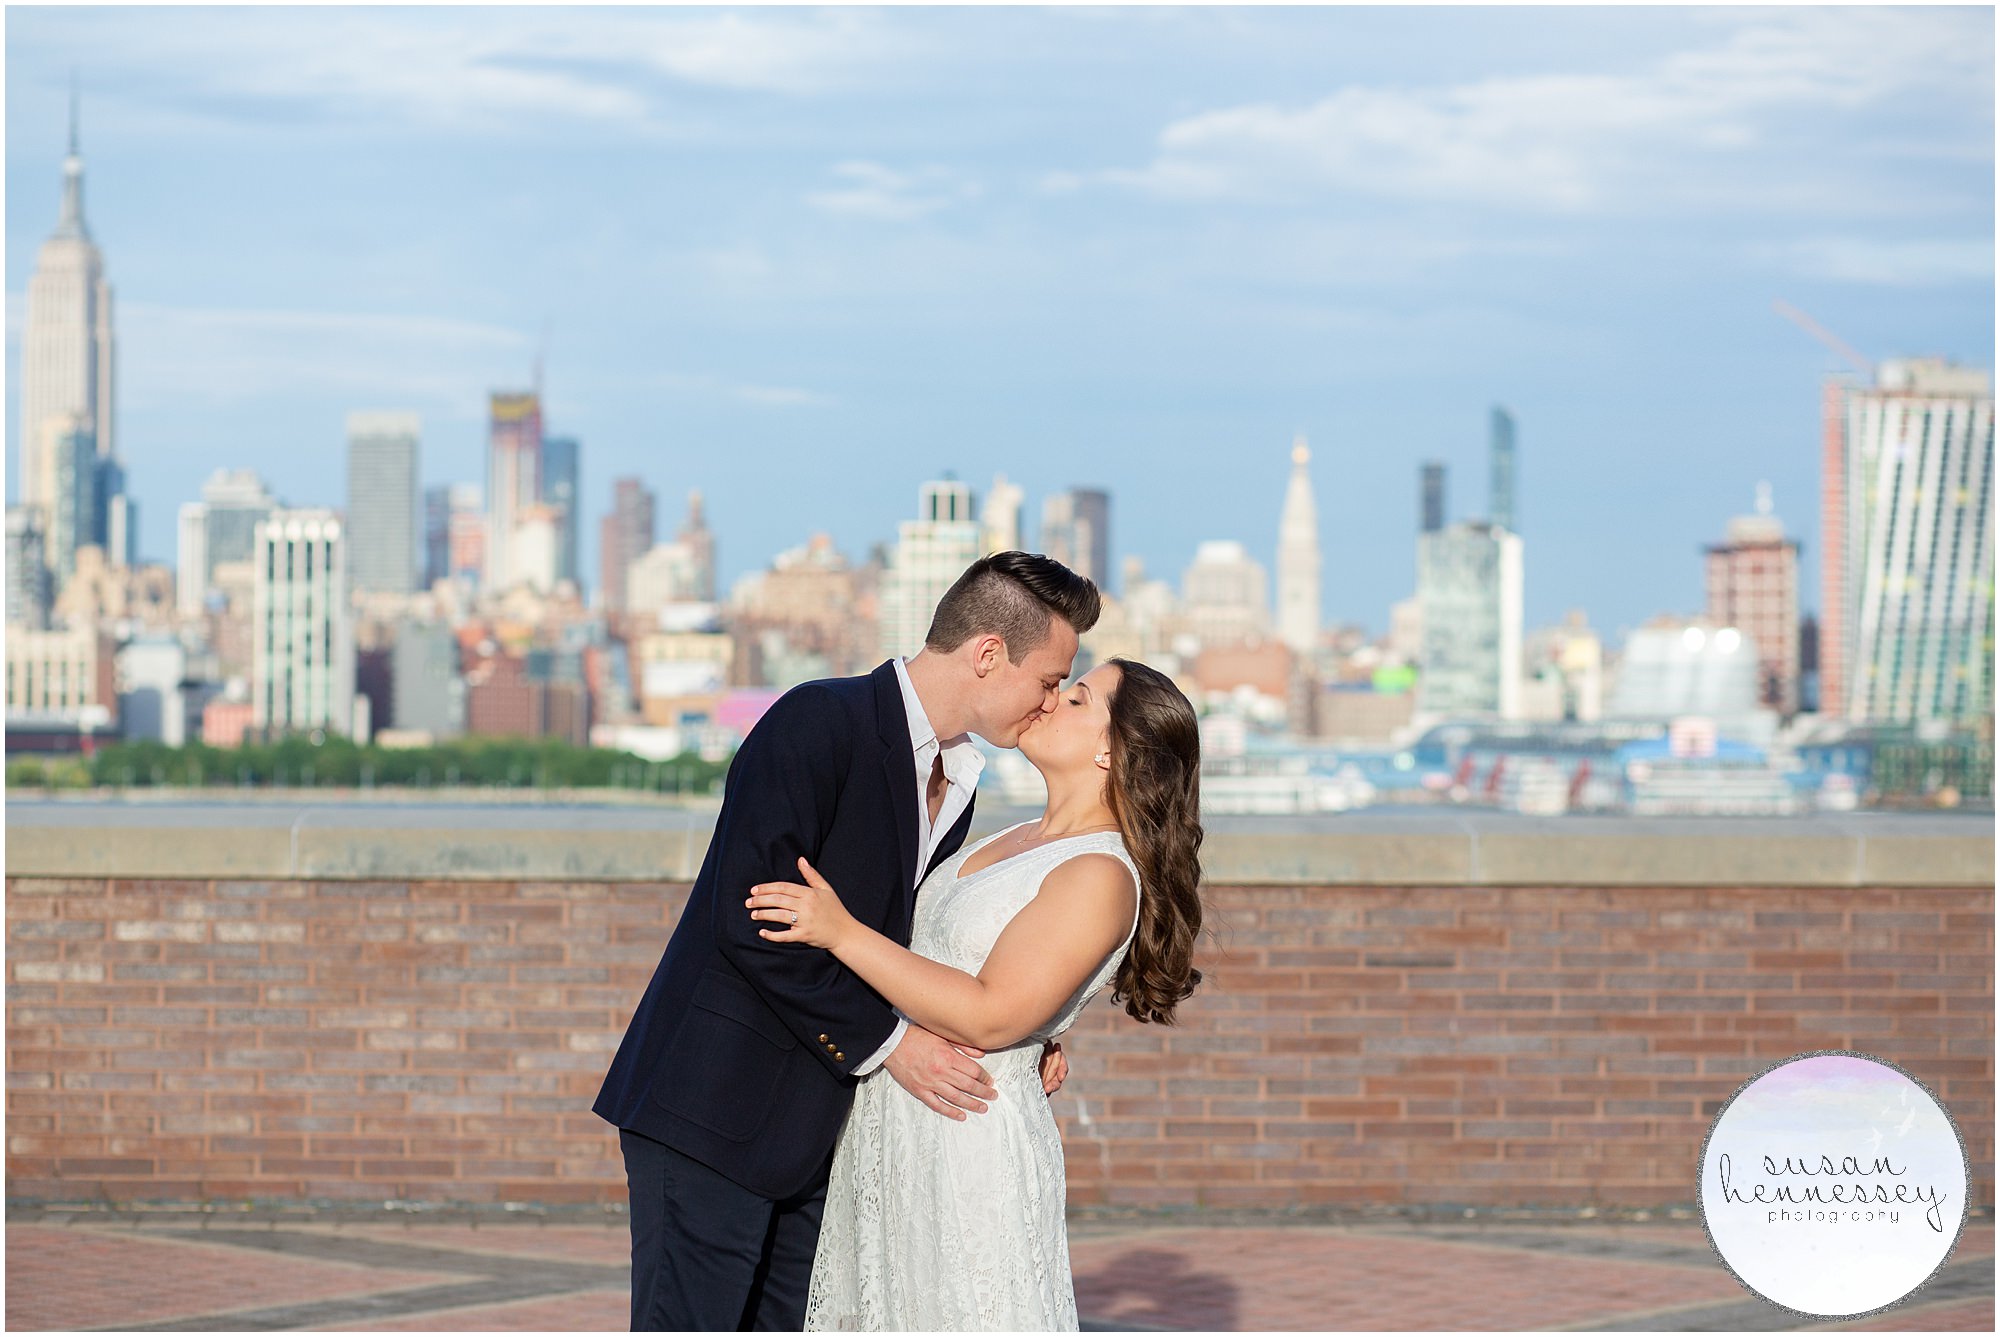 Engagement session overlooking NYC skyline